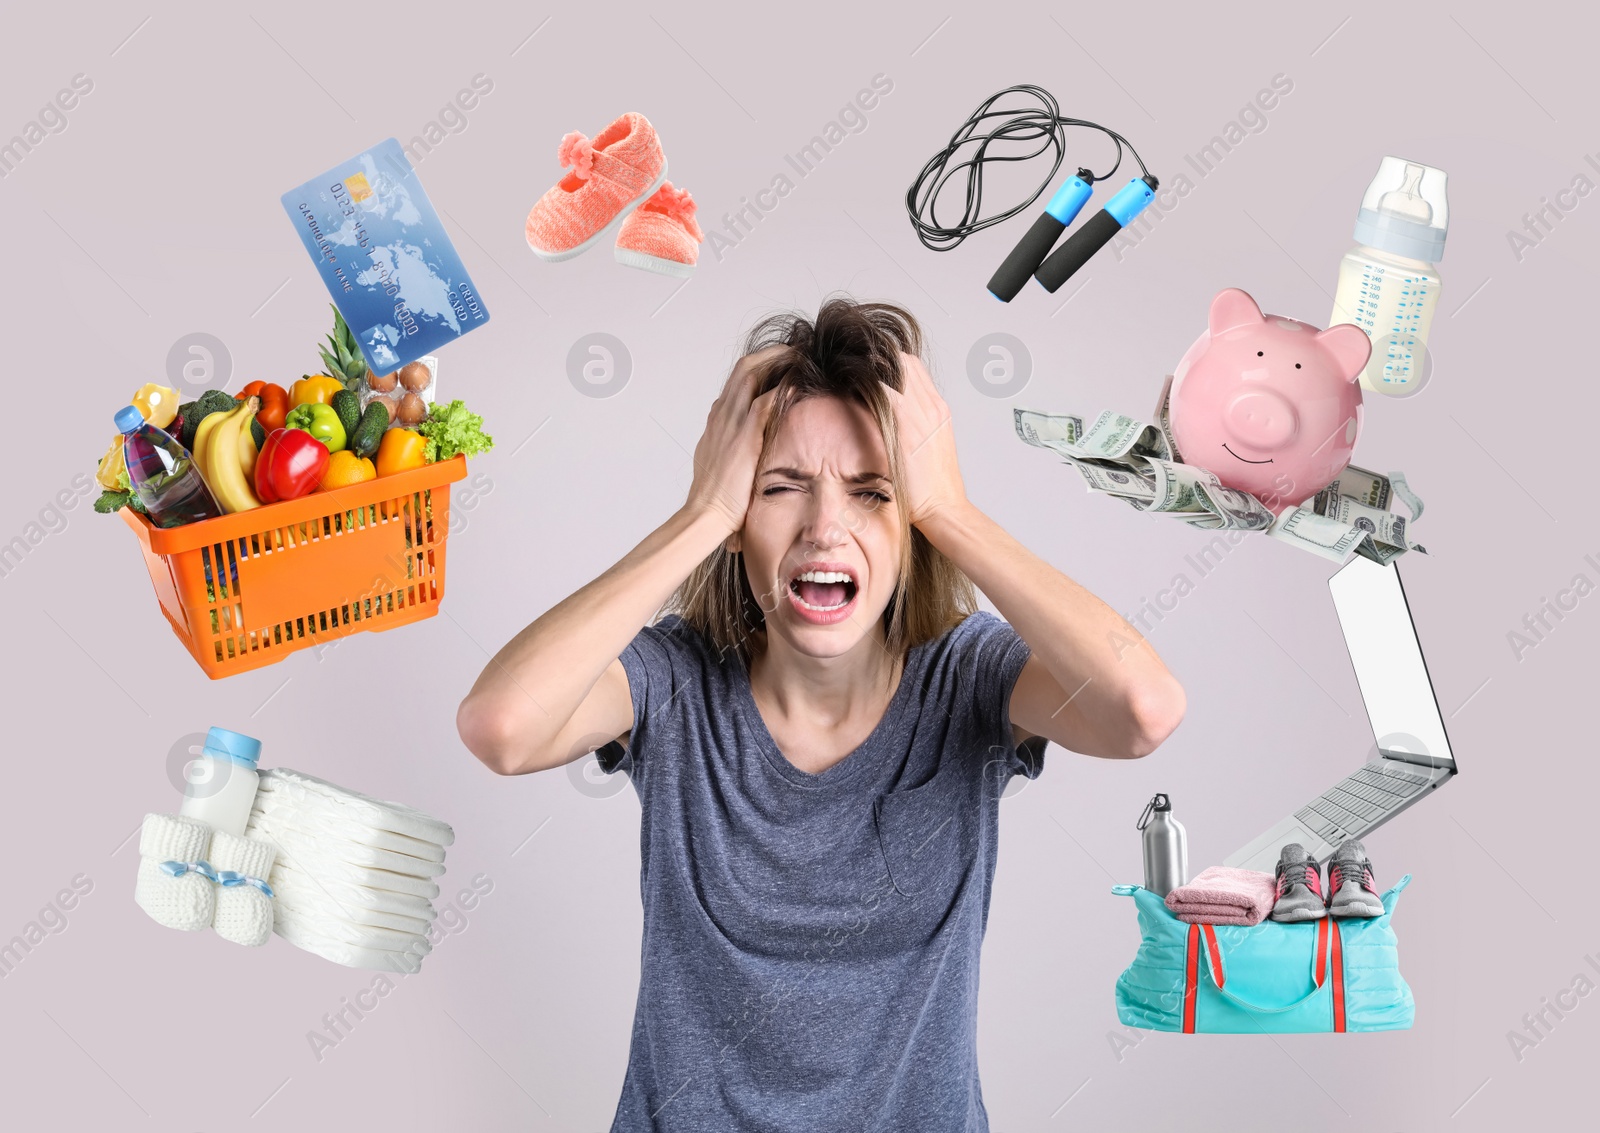 Image of Overwhelmed woman and different objects around her on light grey background